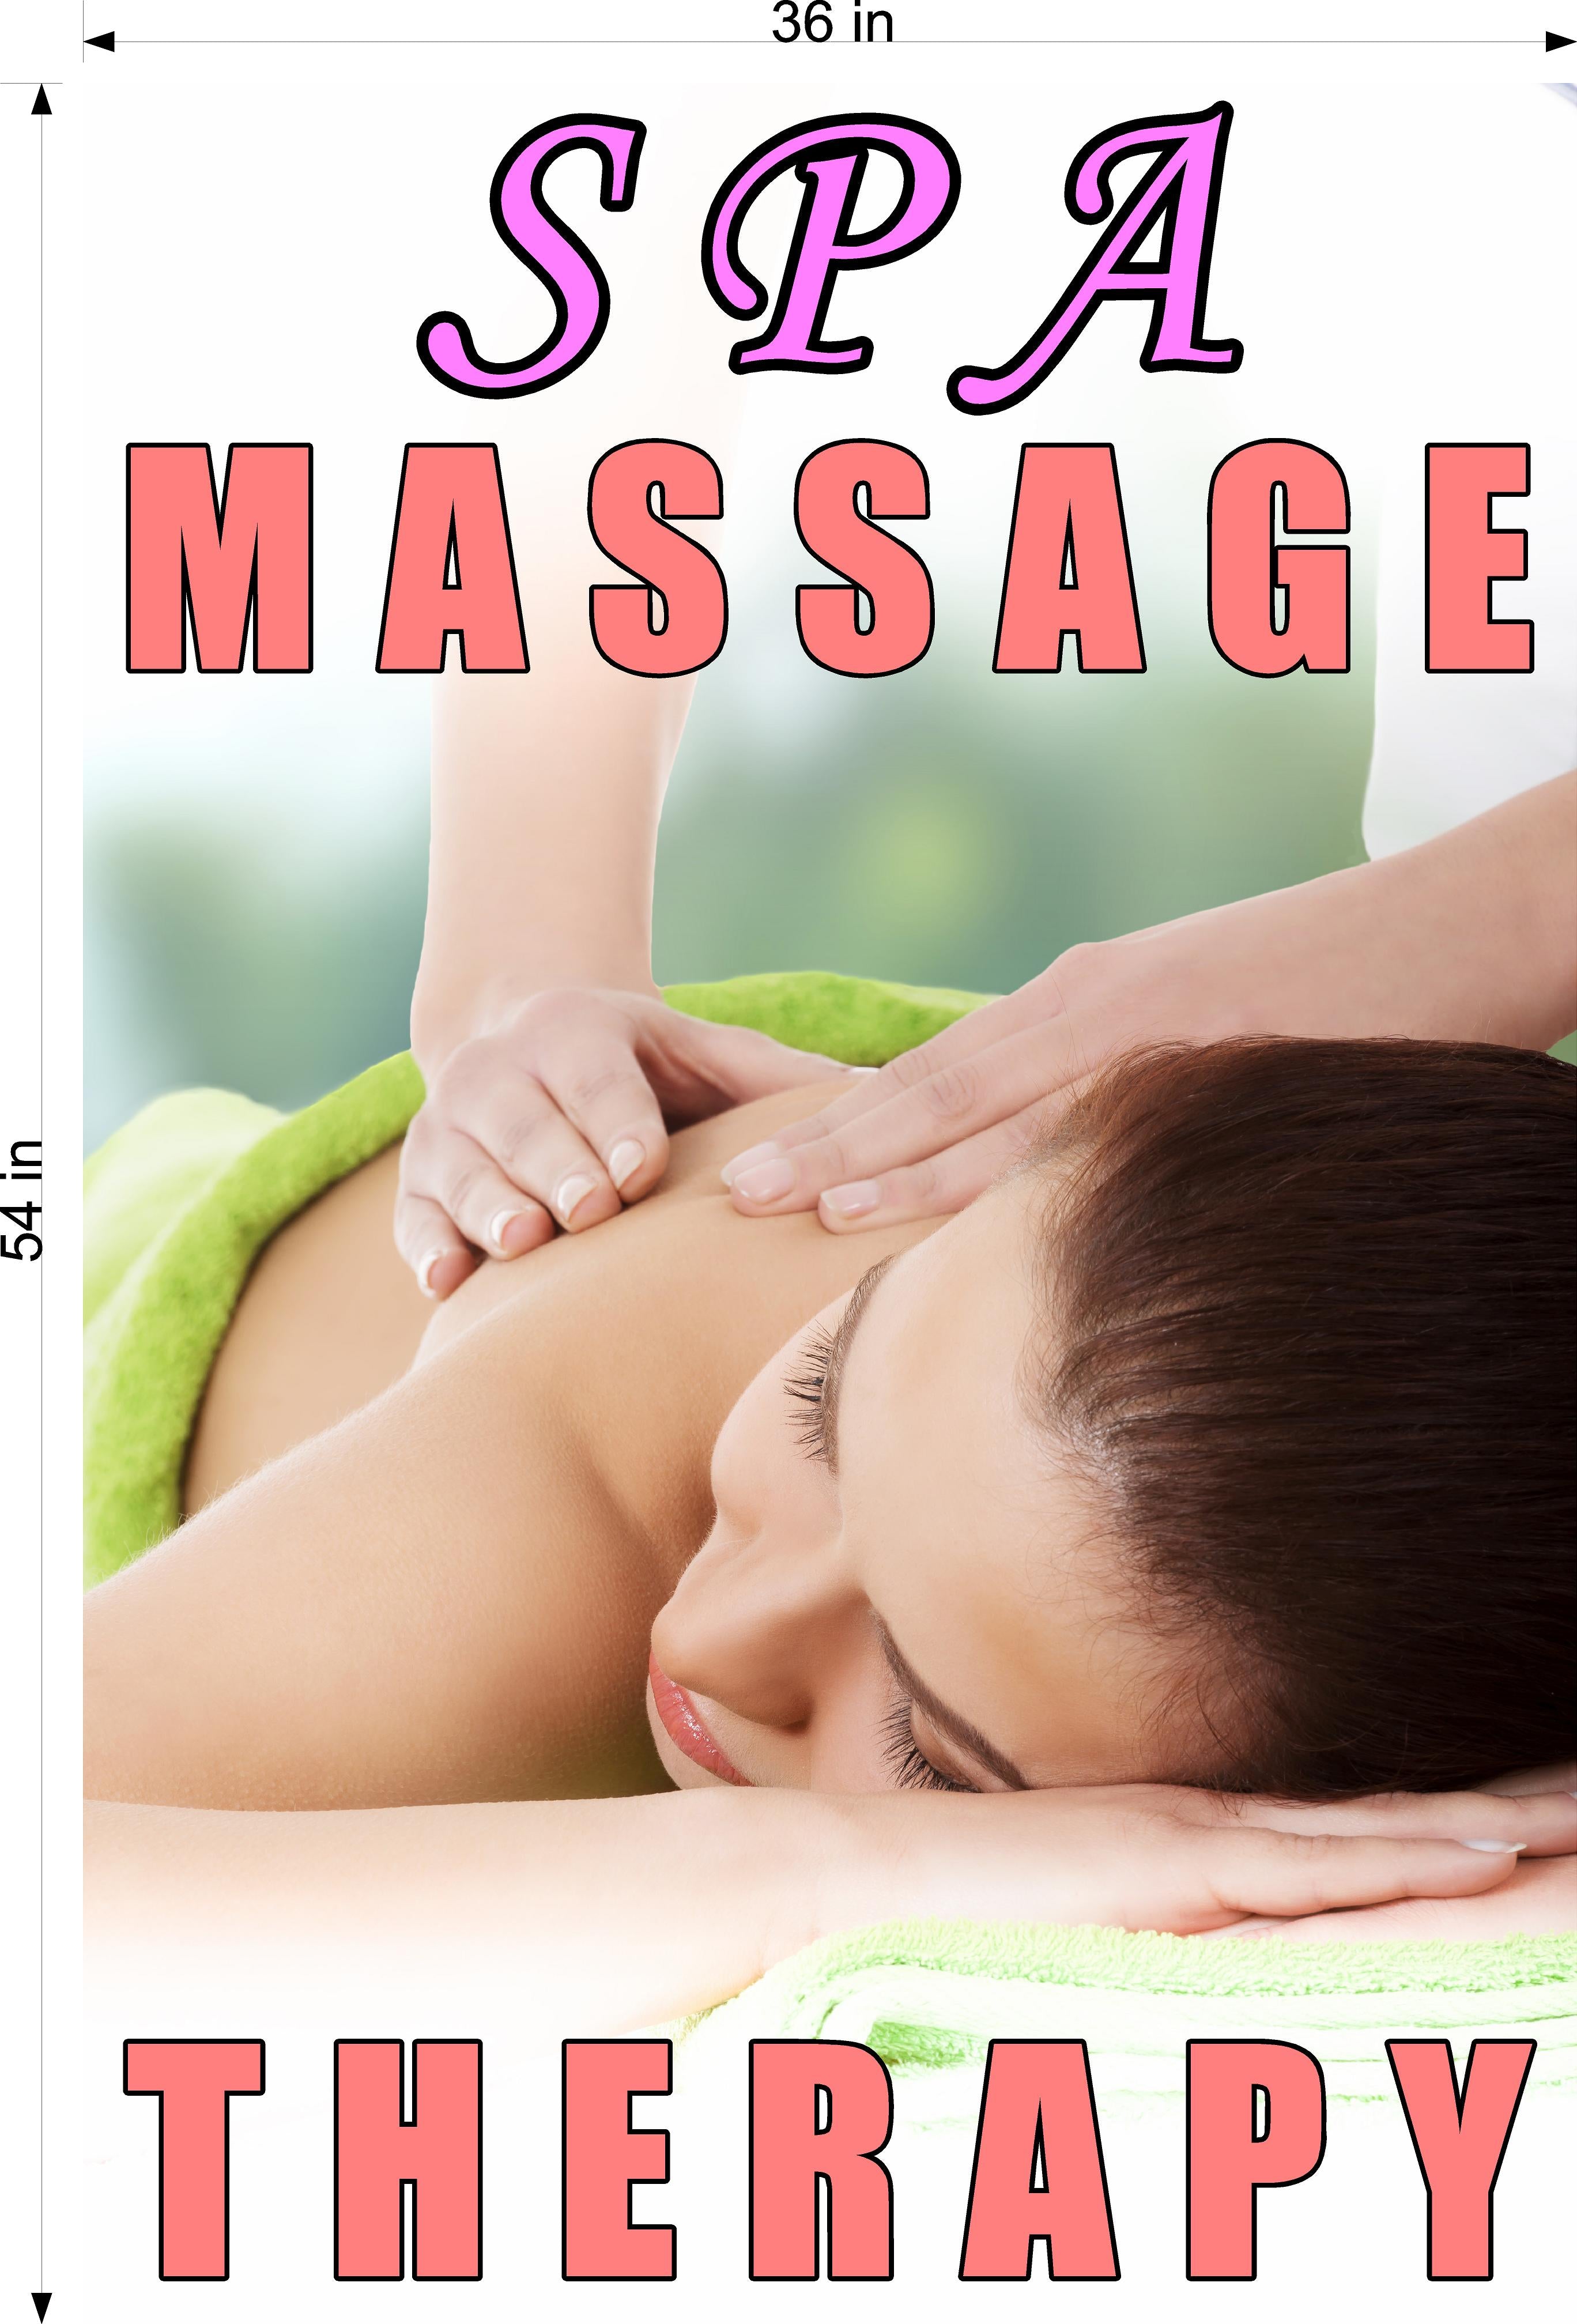 Massage 08 Photo-Realistic Paper Poster Interior Inside Wall Window Non-Laminated Sign Therapy Back Body Foot Vertical